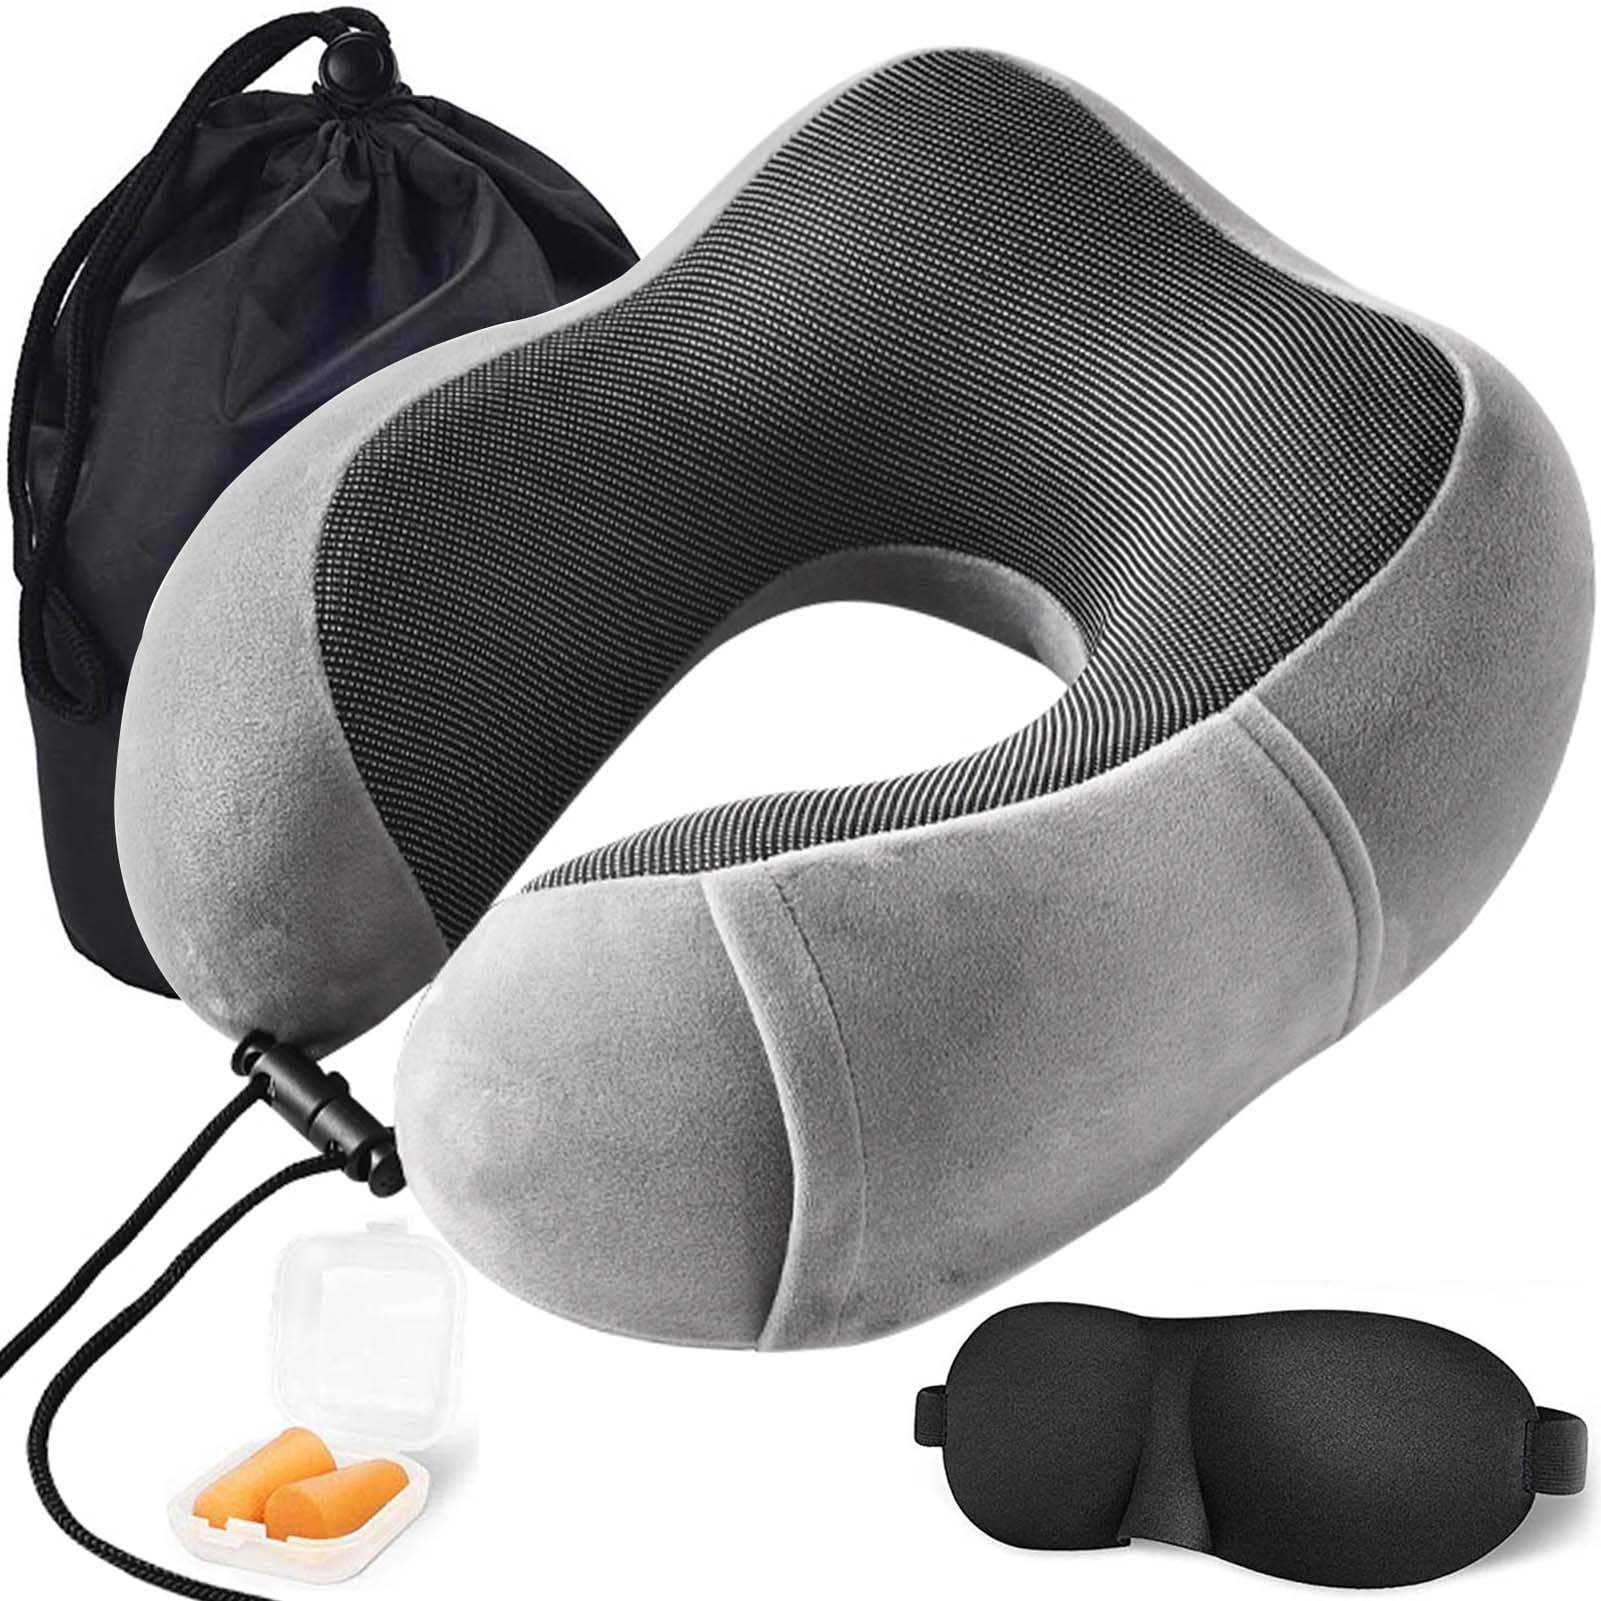 Dream Art Travel Pillow 100% Pure Memory Foam Neck Pillow Earplugs Headrest Airplane Travel Kit with 3D Contoured Eye Masks Machine Washable Standard Breathable Cover Blue and Luxury Bag